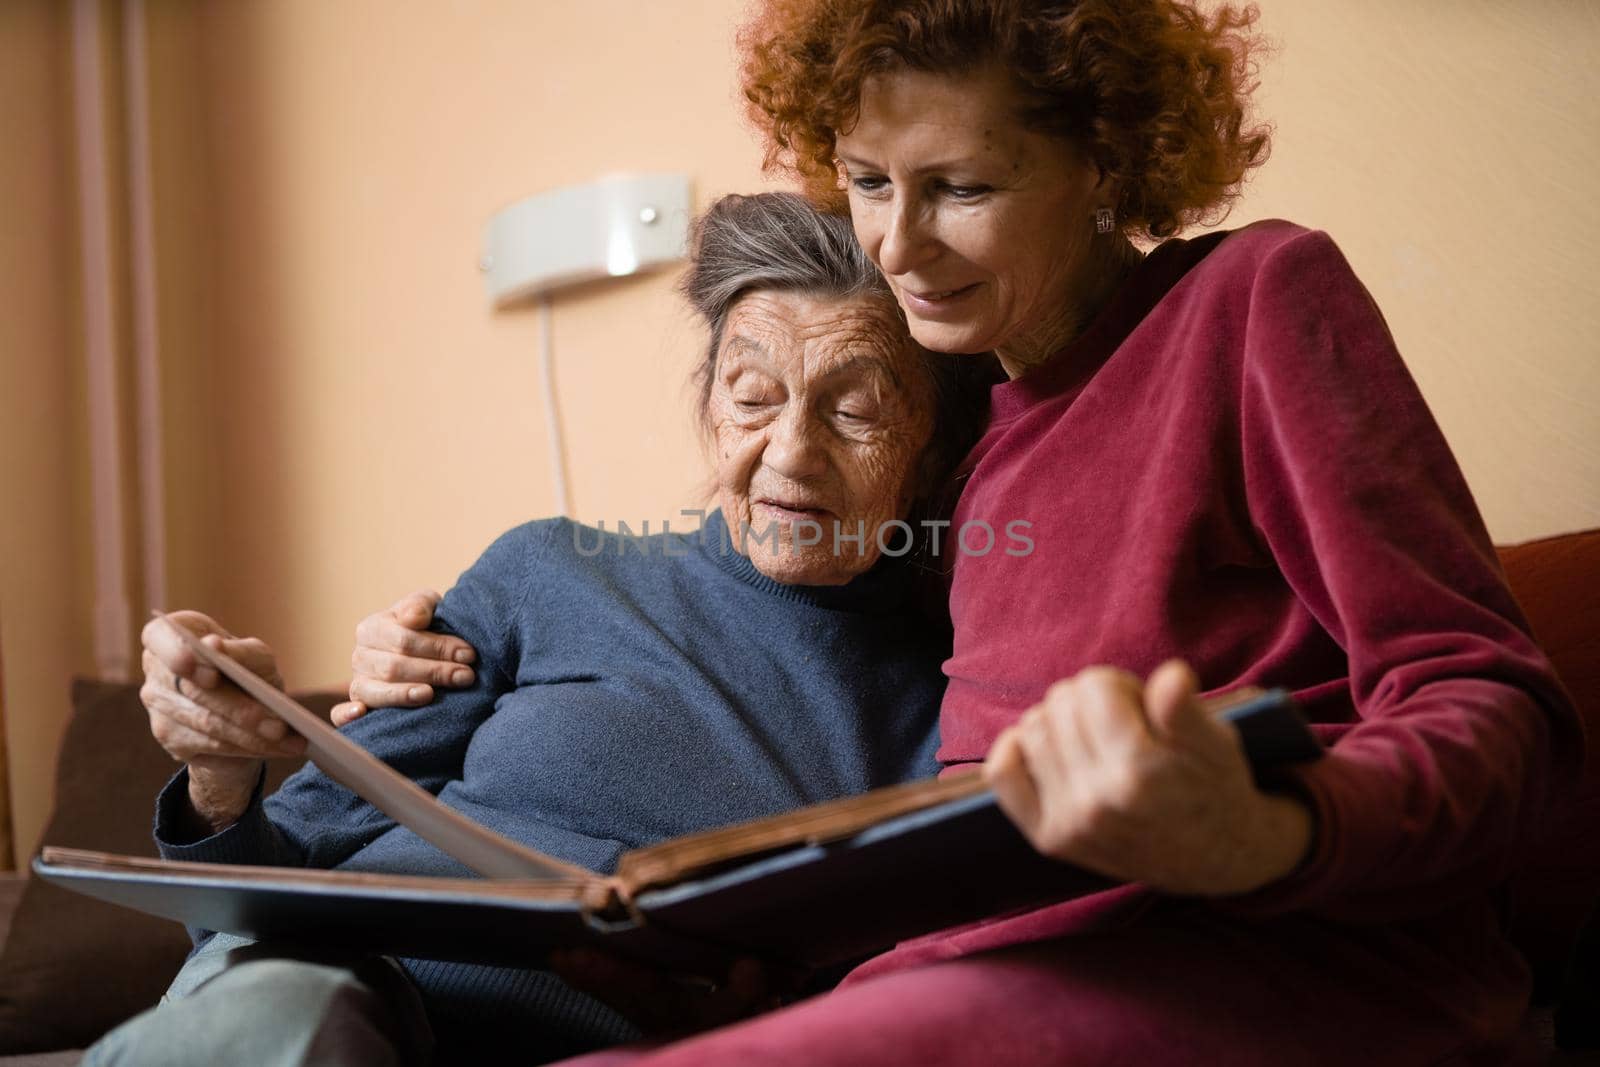 Mature daughter visits senior mother and has fun watching family photo album, sitting in embrace in living room couch. Mothers Day. Elderly woman and old gray hair grandmother laugh and remember youth